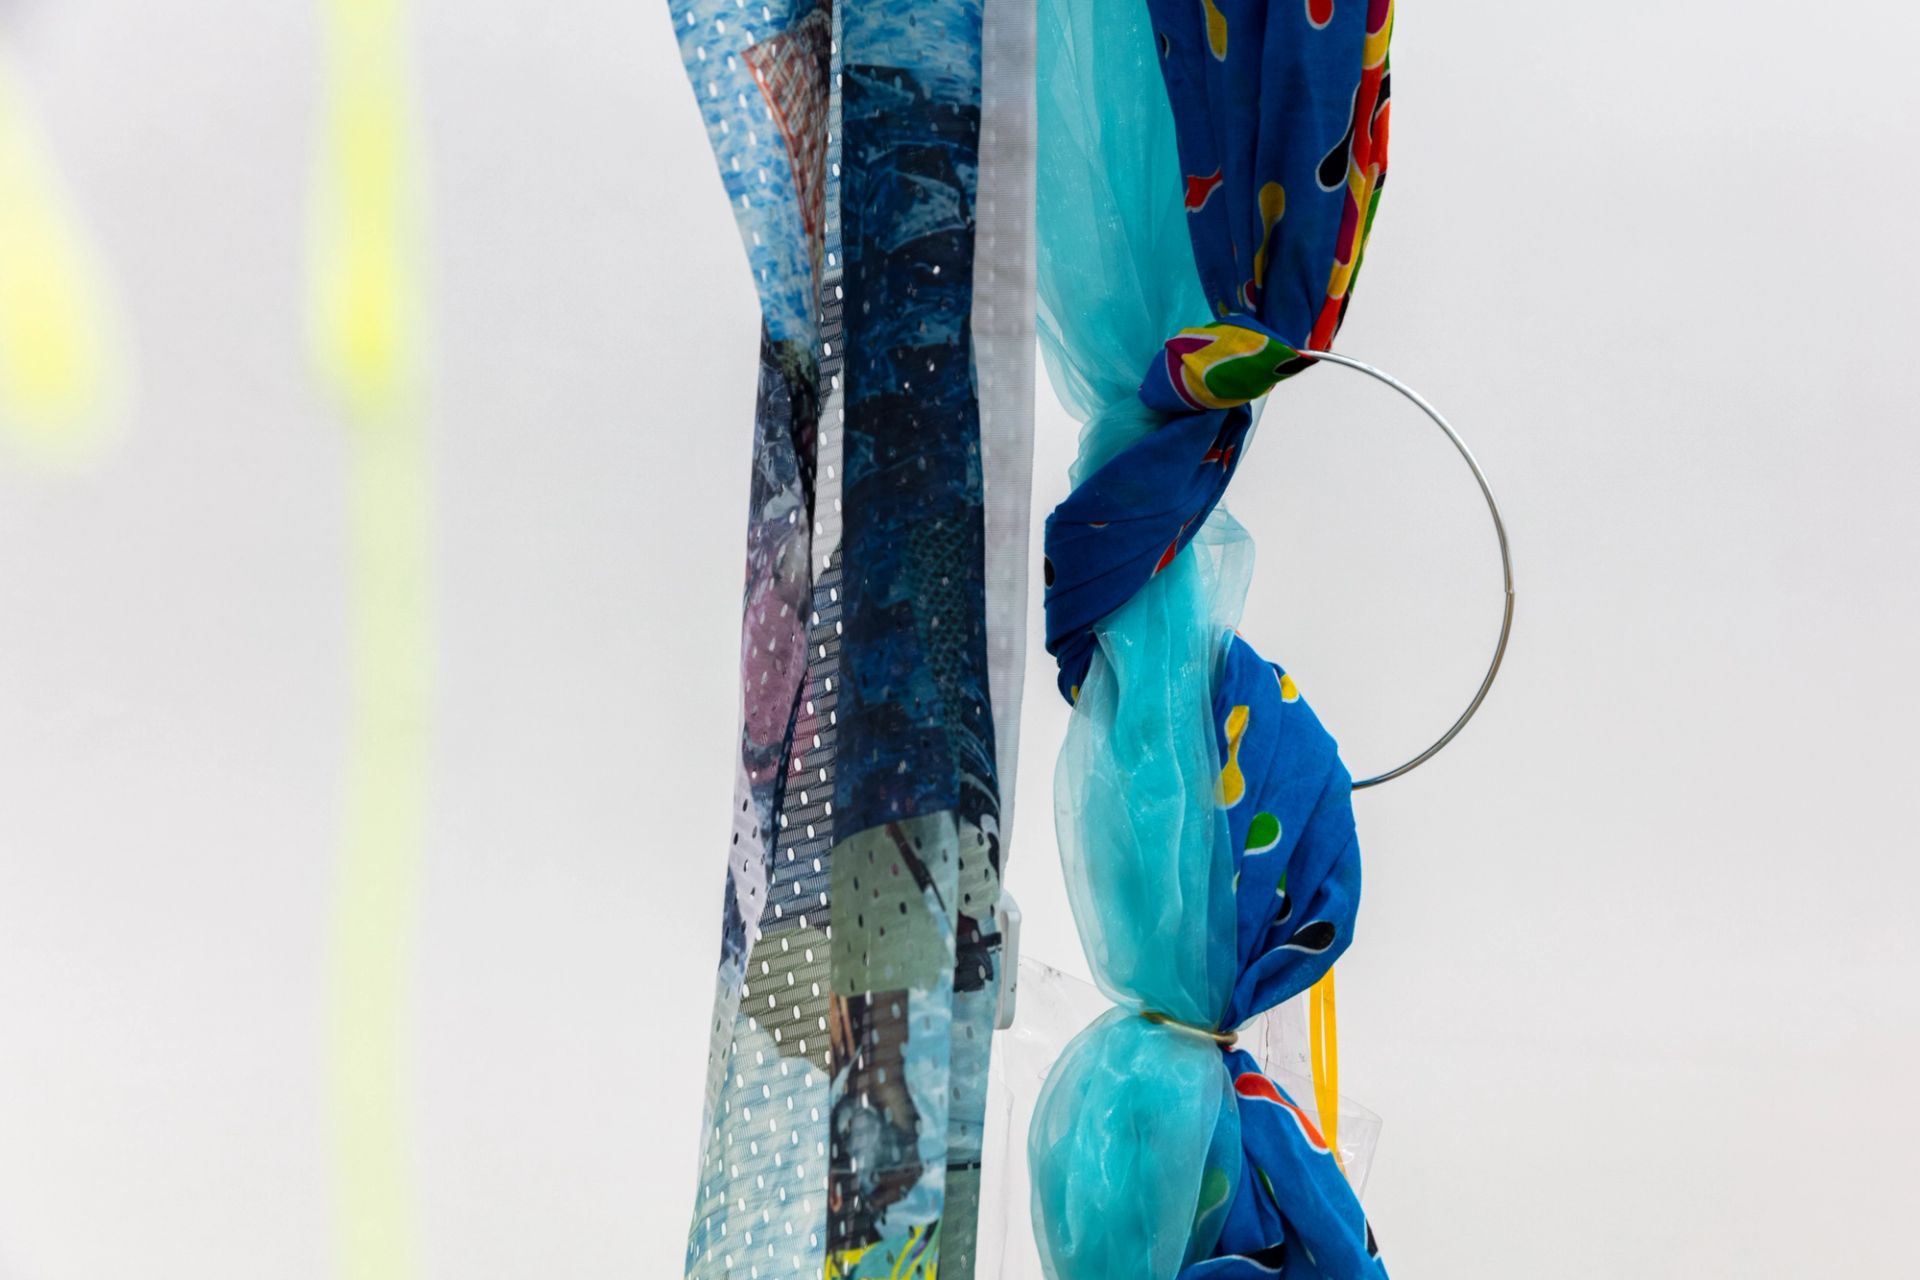 Anna Ehrenstein, Convivial Fiber, 2021, Tools for Conviviality, sublimation-print on polyester, cotton, latex, pvc, metal, shoelaces, clothing hanger, reflective cord